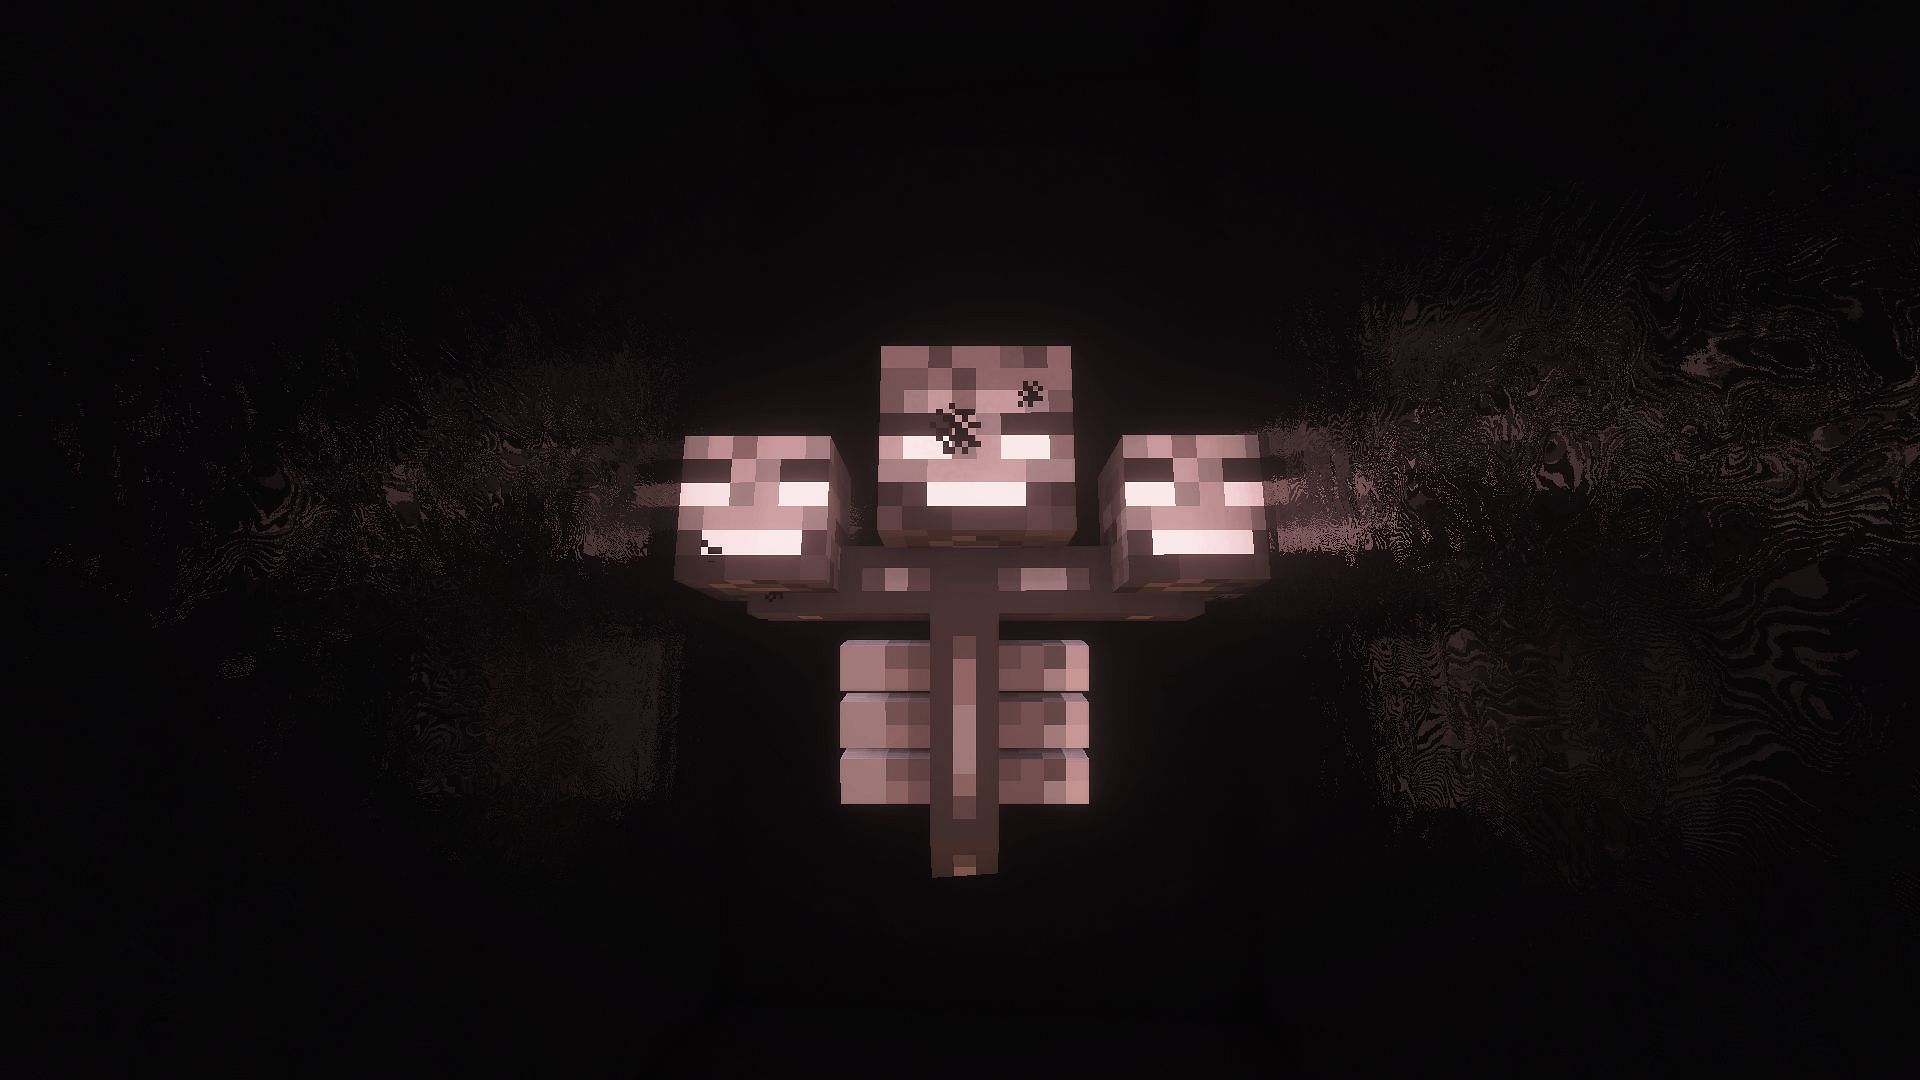 The Wither is one of the most destructive bosses in Minecraft (Image via Minecraft)